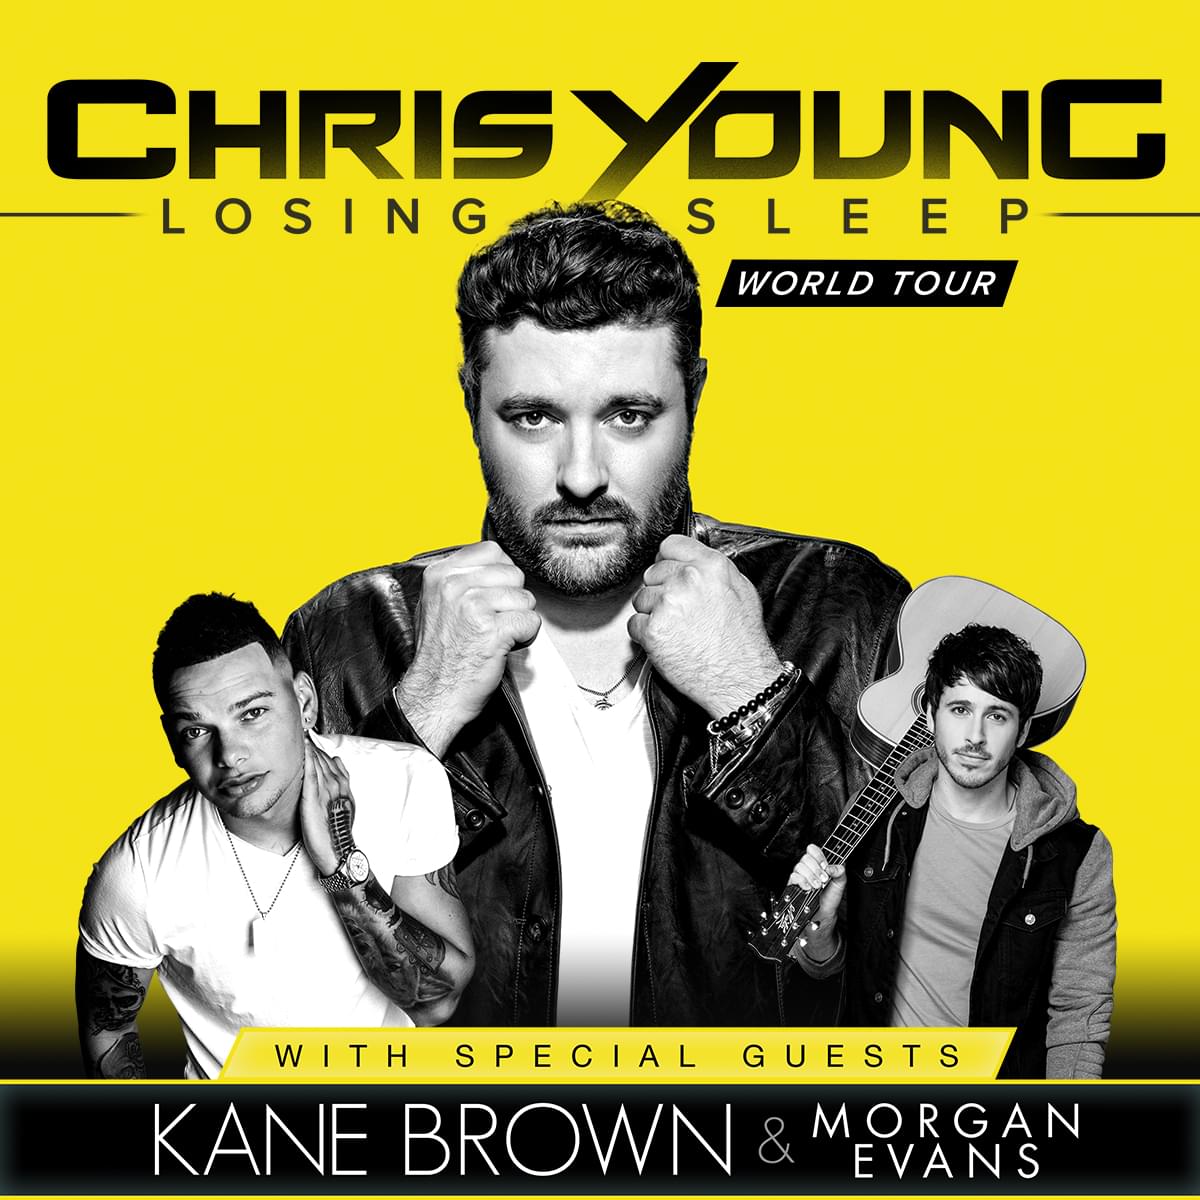 Chris Young, Kane Brown & Morgan Evans Concert Tickets at TixTM, New York, United States